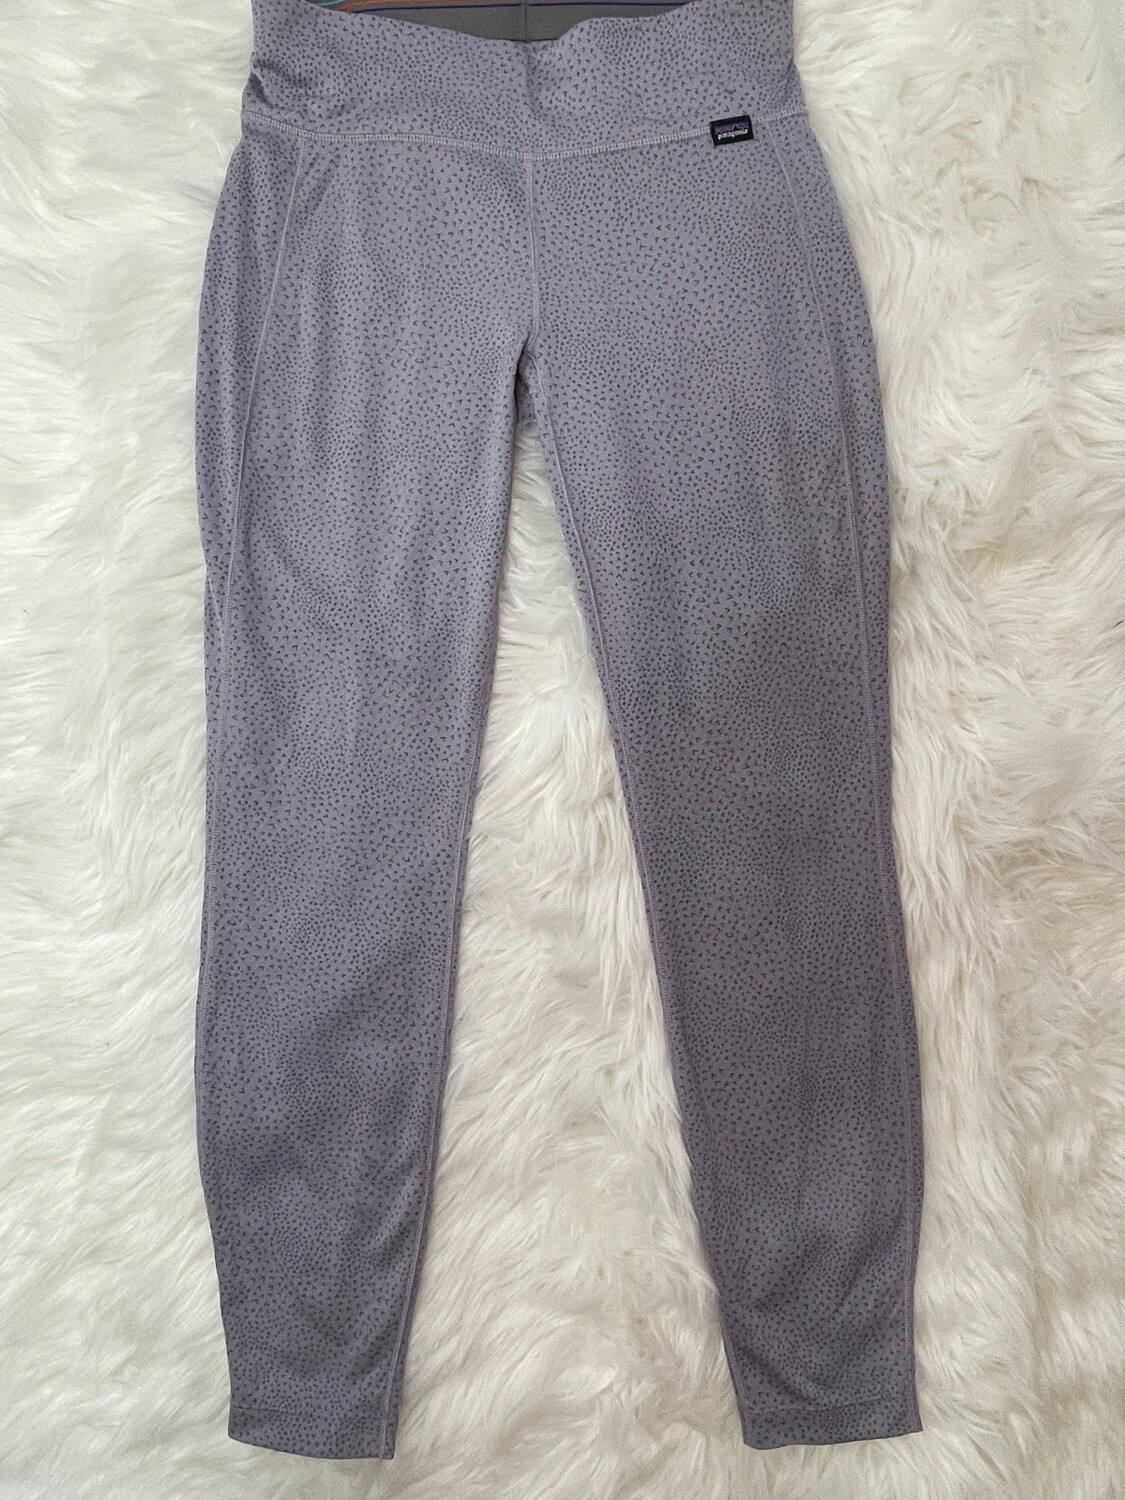 Patagonia Lilac Cariliene Midweight Athletic Pants  - S